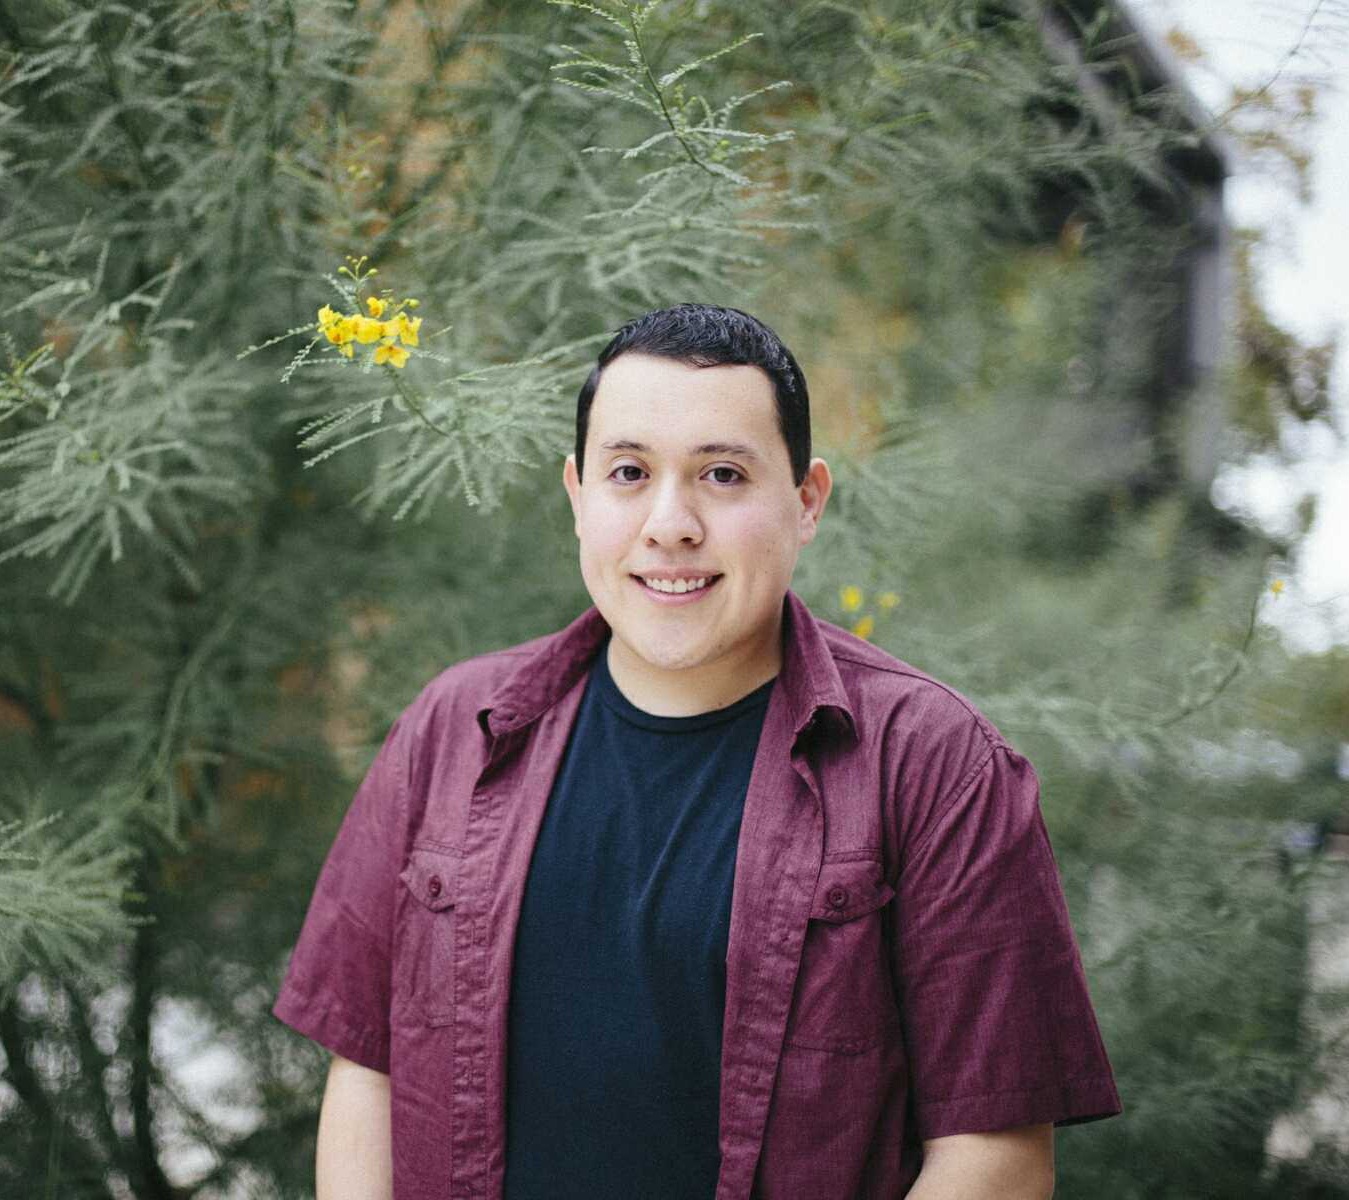 Young man smiling in front of some trees